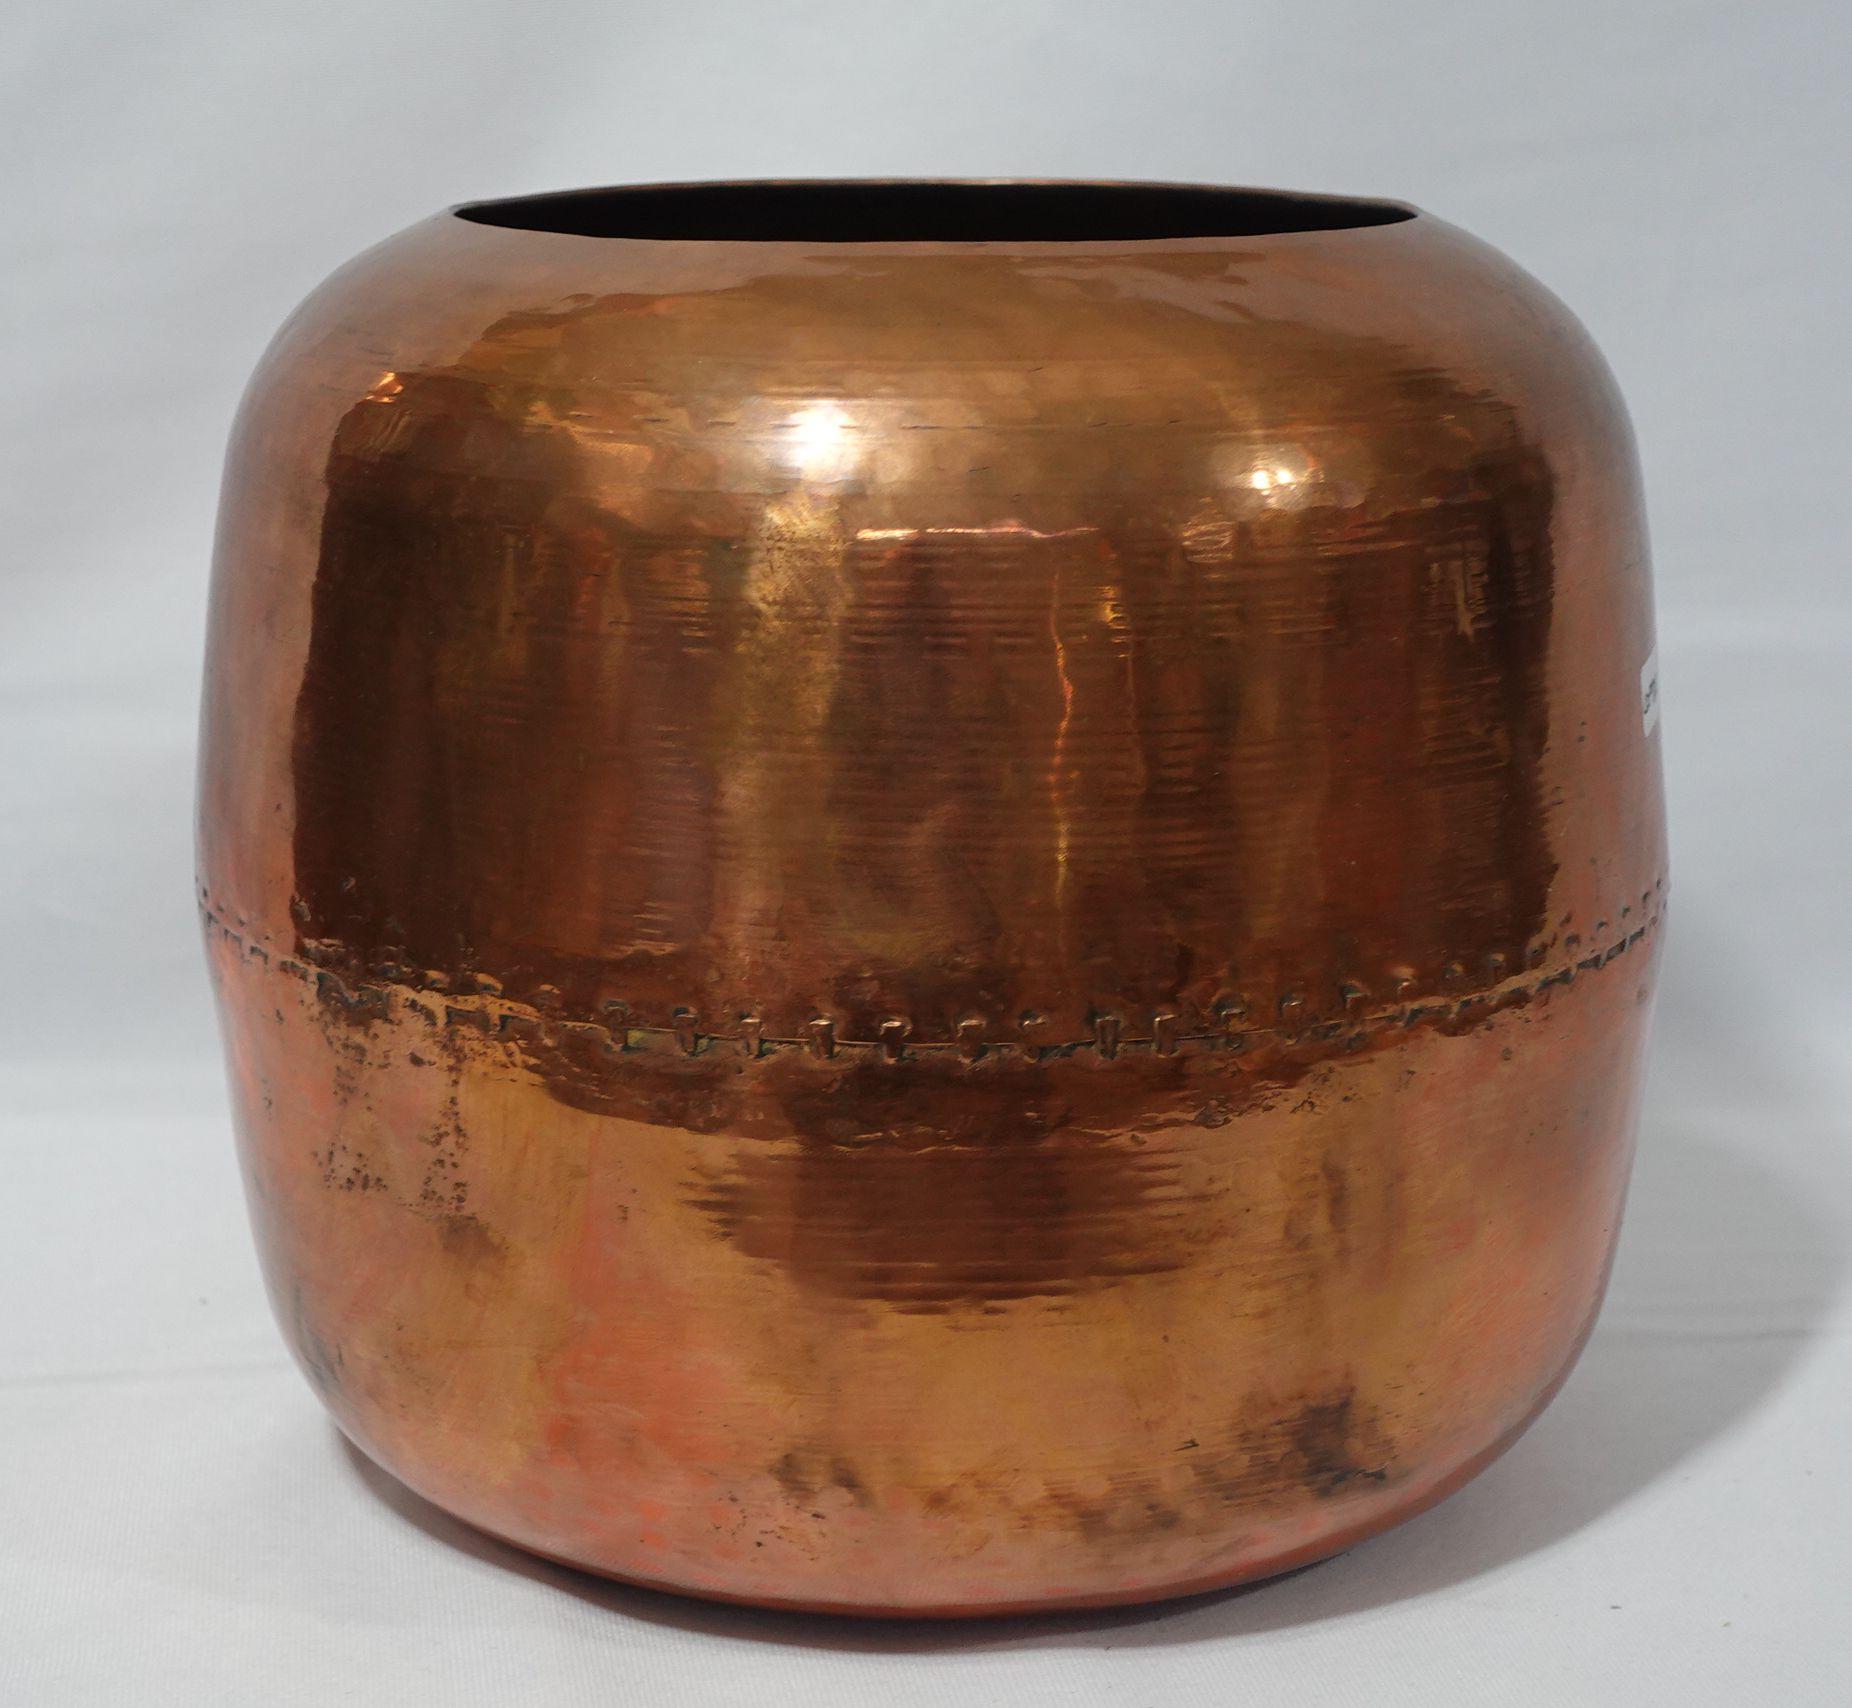 Old and Large Hand Hammered Copper Bucket/Stockpot with handles on the top, CO#001
Made in Turkey